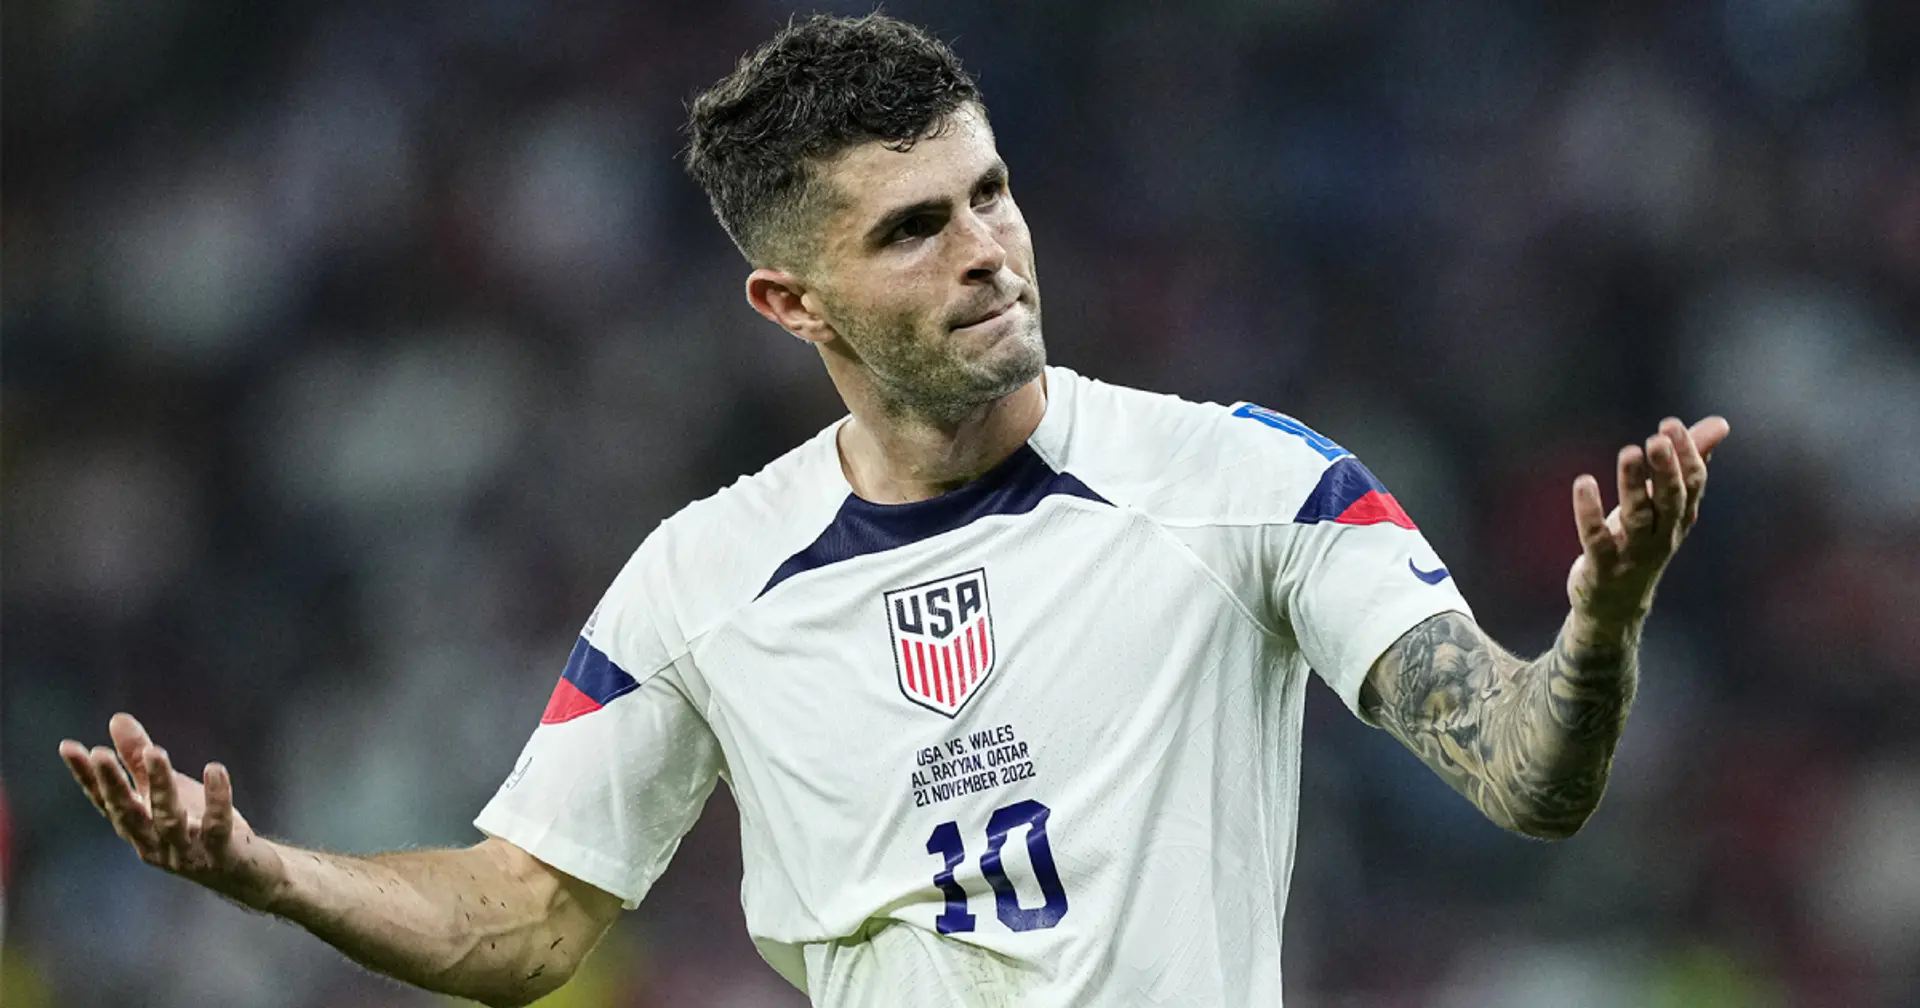 'Watching this is bittersweet': fans react as Pulisic provides assist in World Cup opener